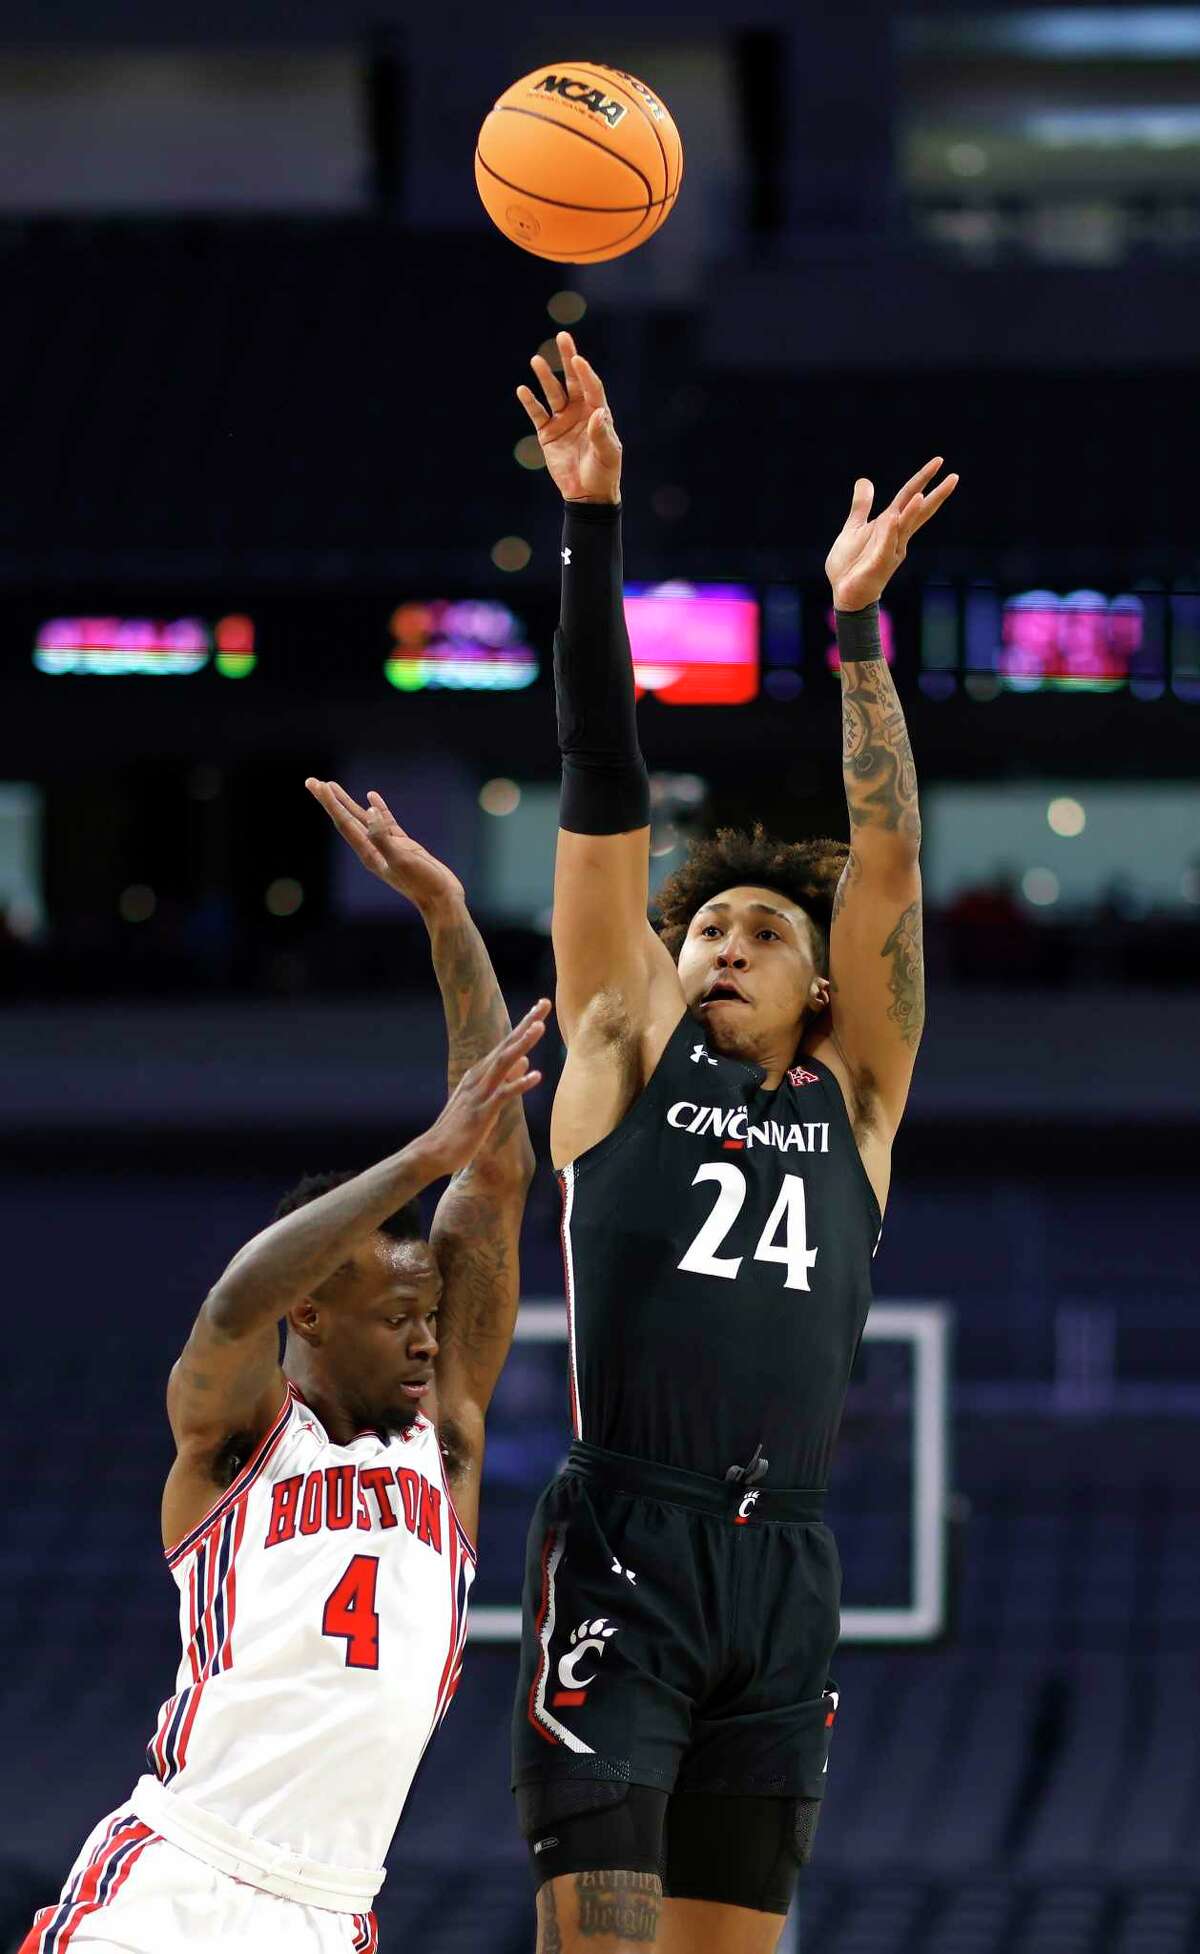 FORT WORTH, TX - MARCH 11: Jeremiah Davenport #24 of the Cincinnati Bearcats shoots the ball over Taze Moore #4 of the Houston Cougars in the first half of the American Athletic Conference Mens Basketball Tournament Quarterfinals at Dickies Arena on March 11, 2022 in Fort Worth, Texas.